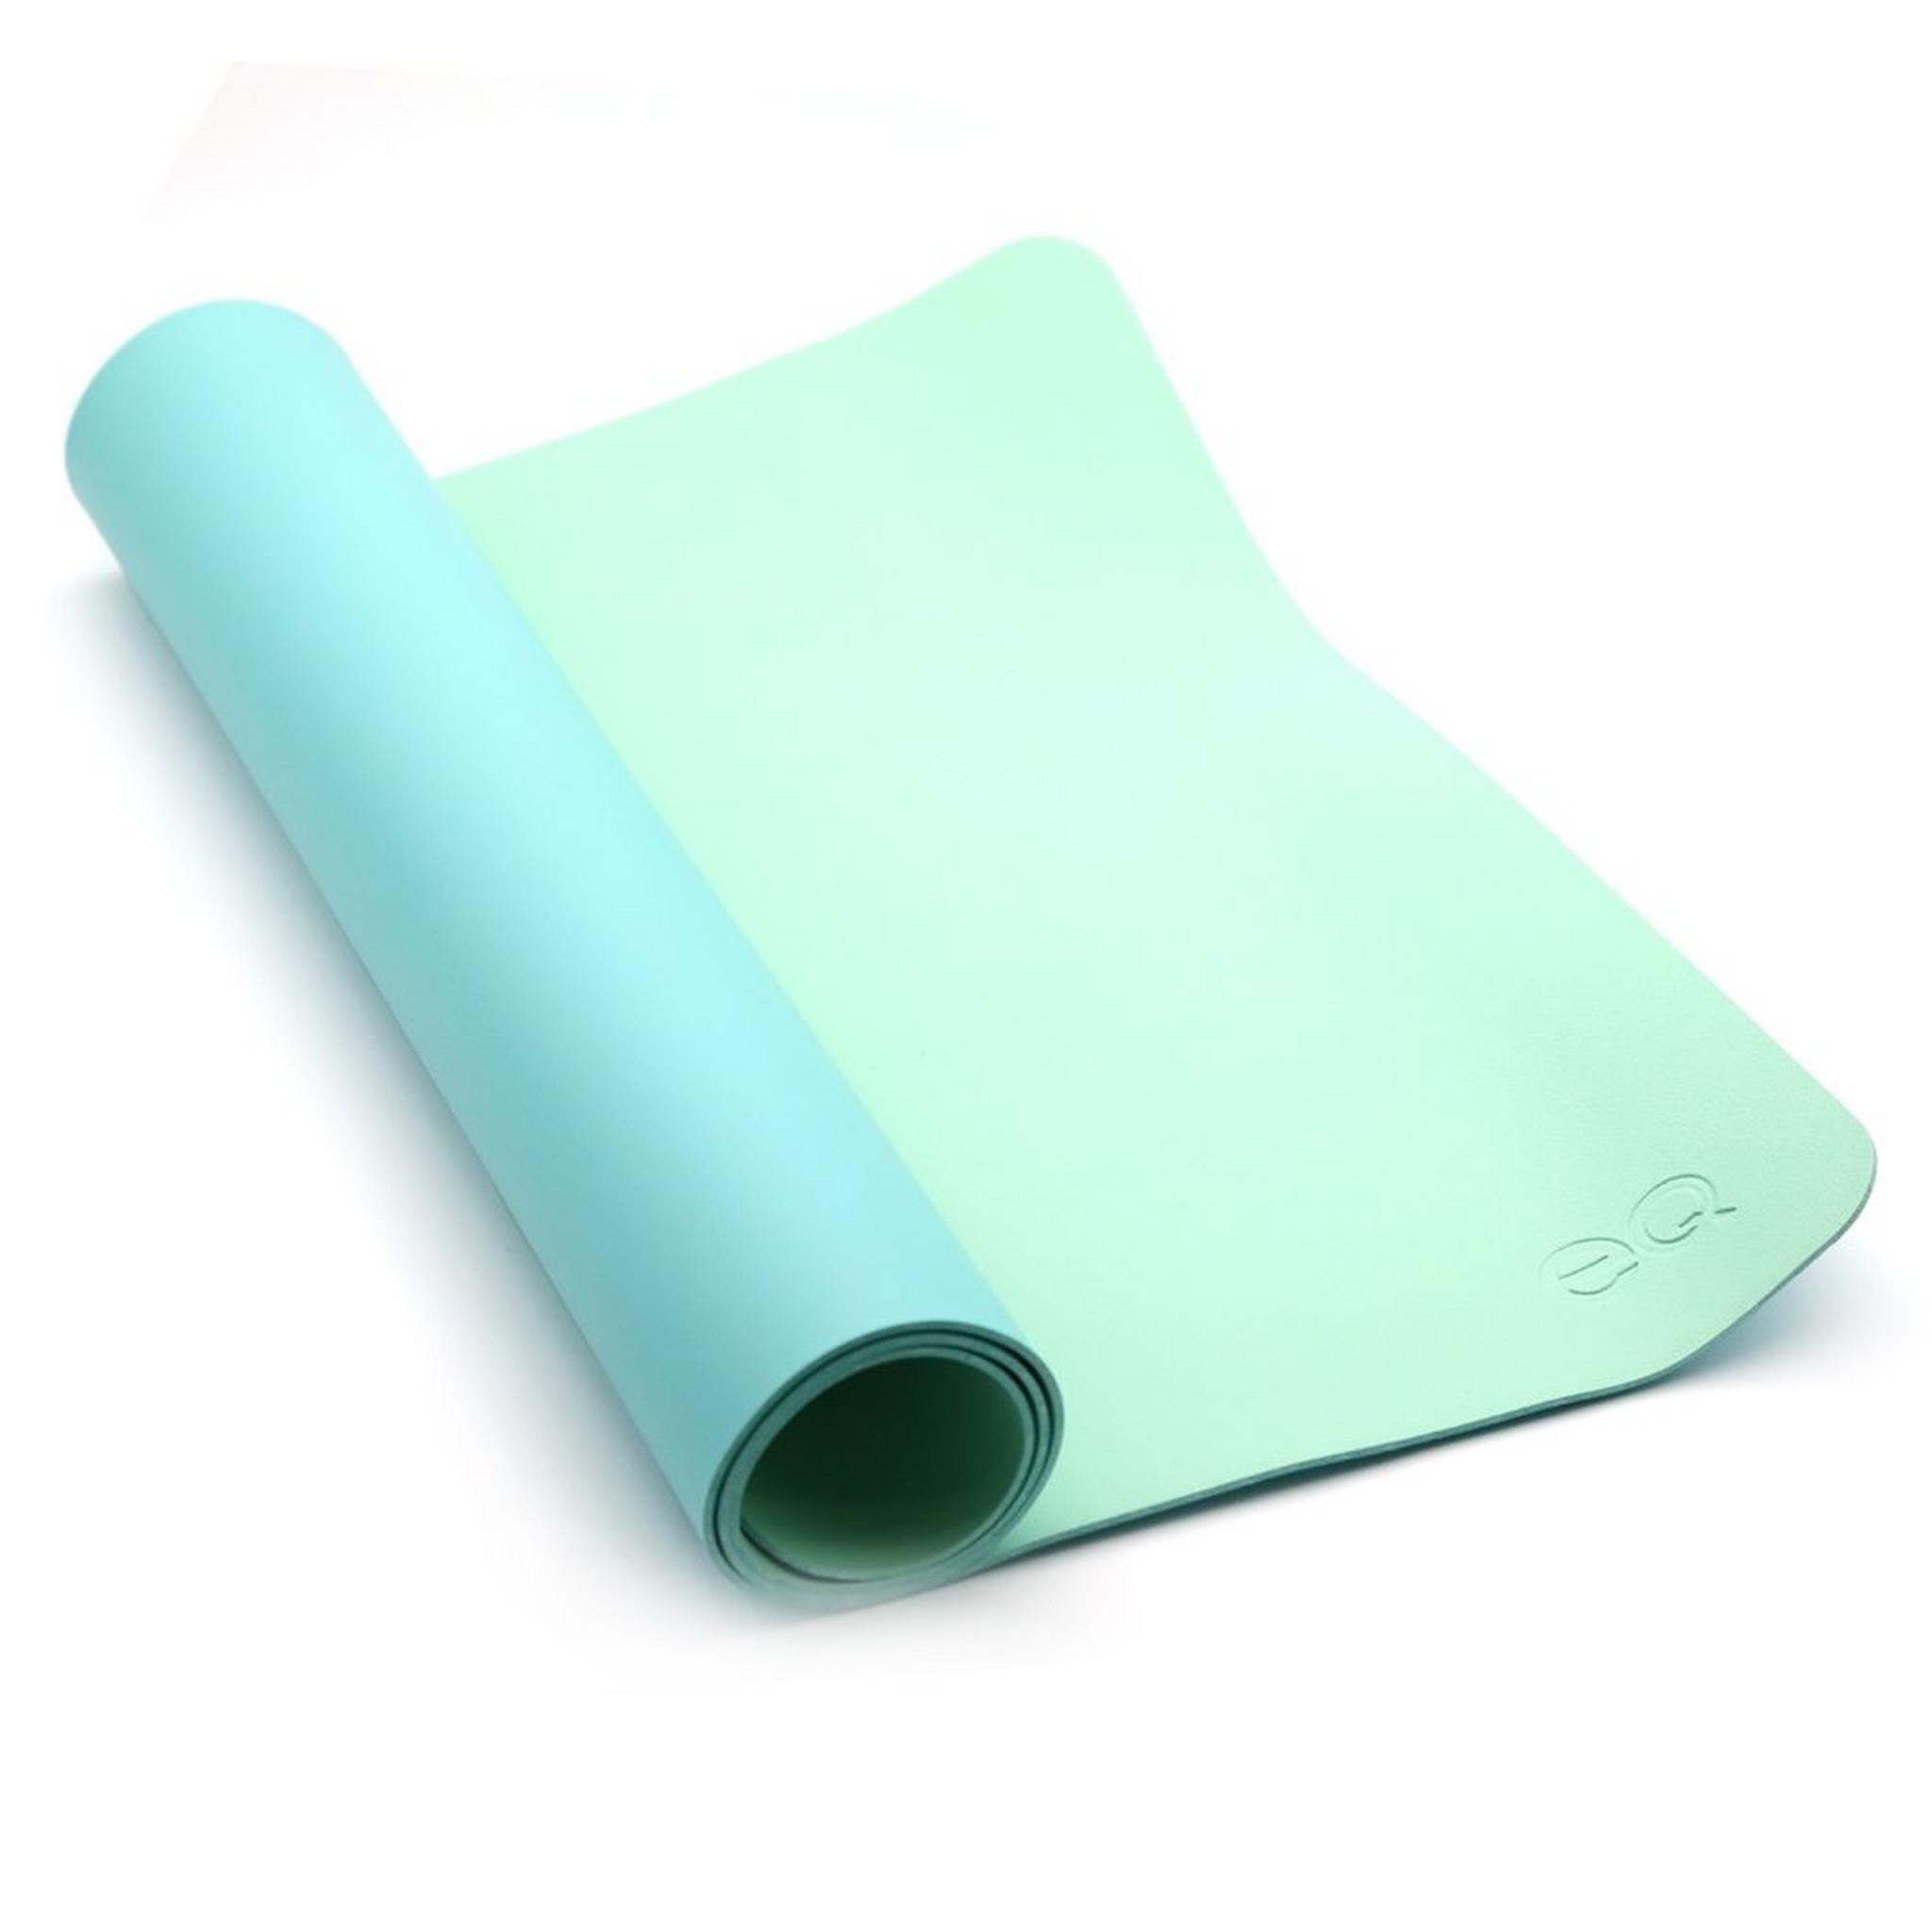 EQ Water-Proof Mouse Pad - Mint Green / Sky Blue